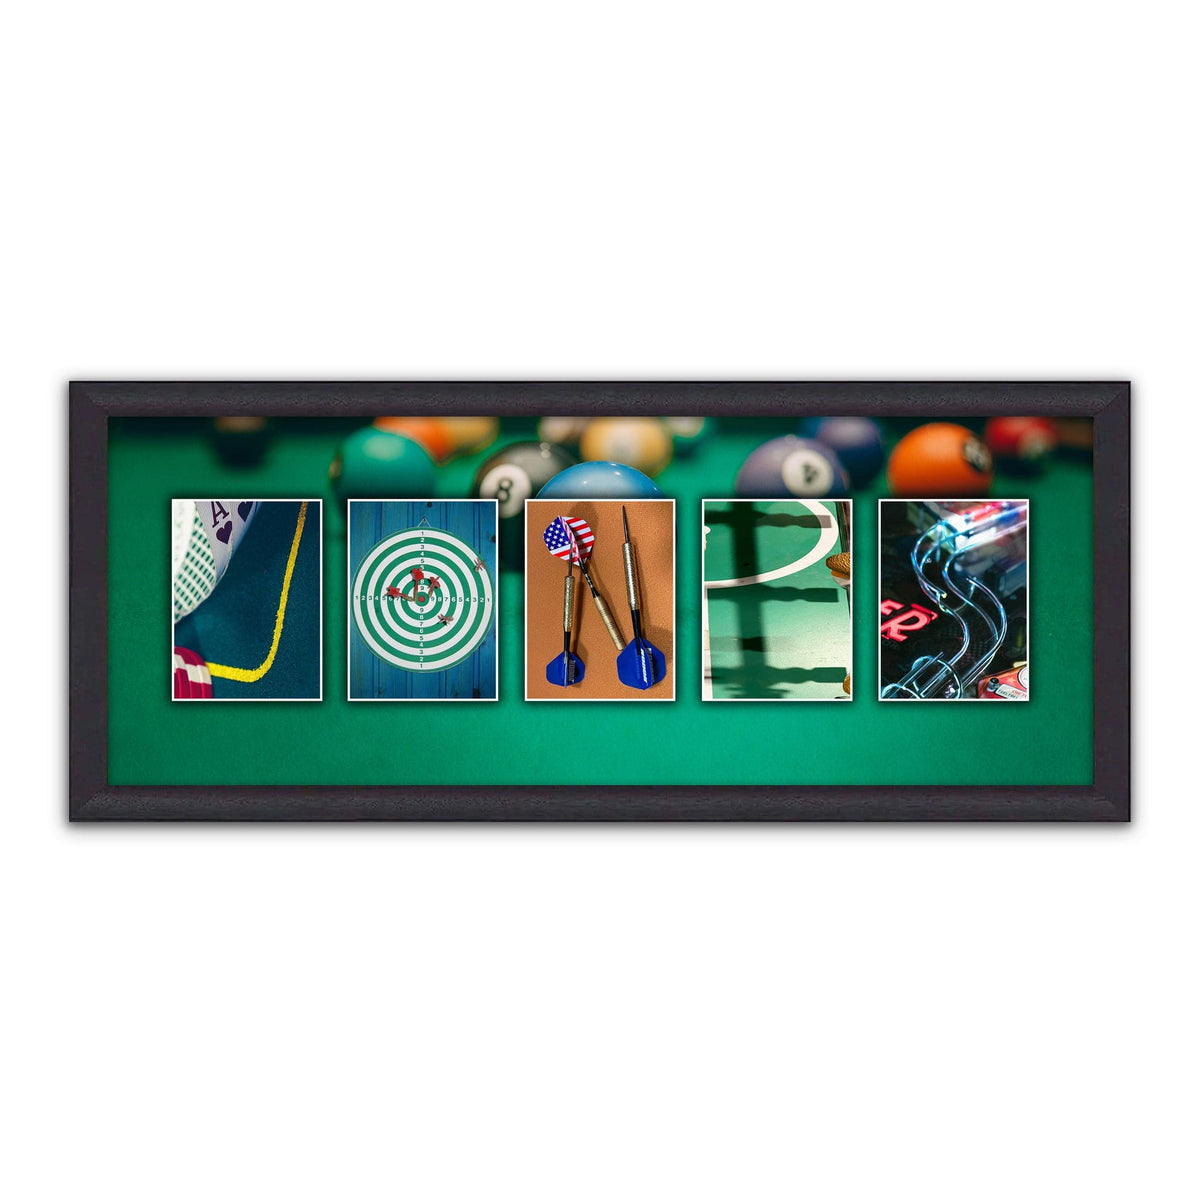 Personalized game name art framed canvas game room decor